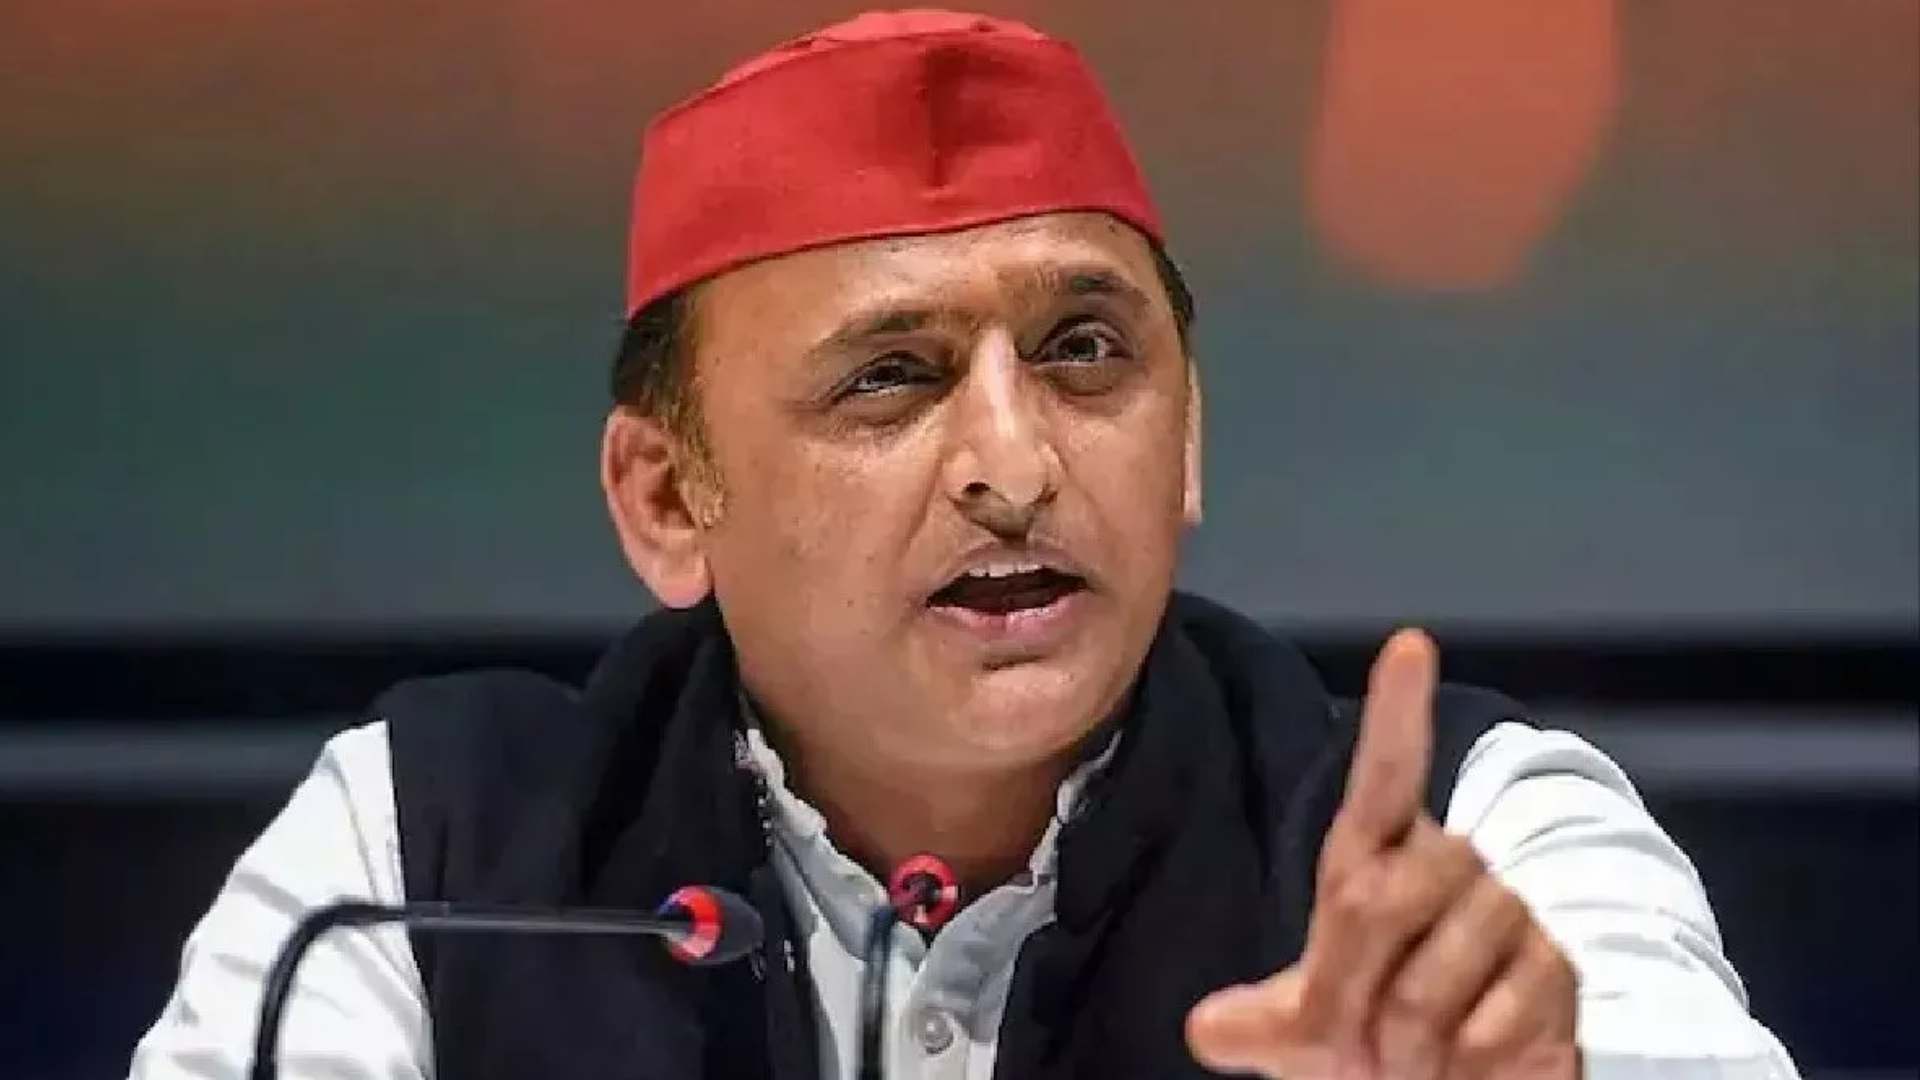 BJP's film flopped on opening day: Akhilesh after phase 1 of LS polls